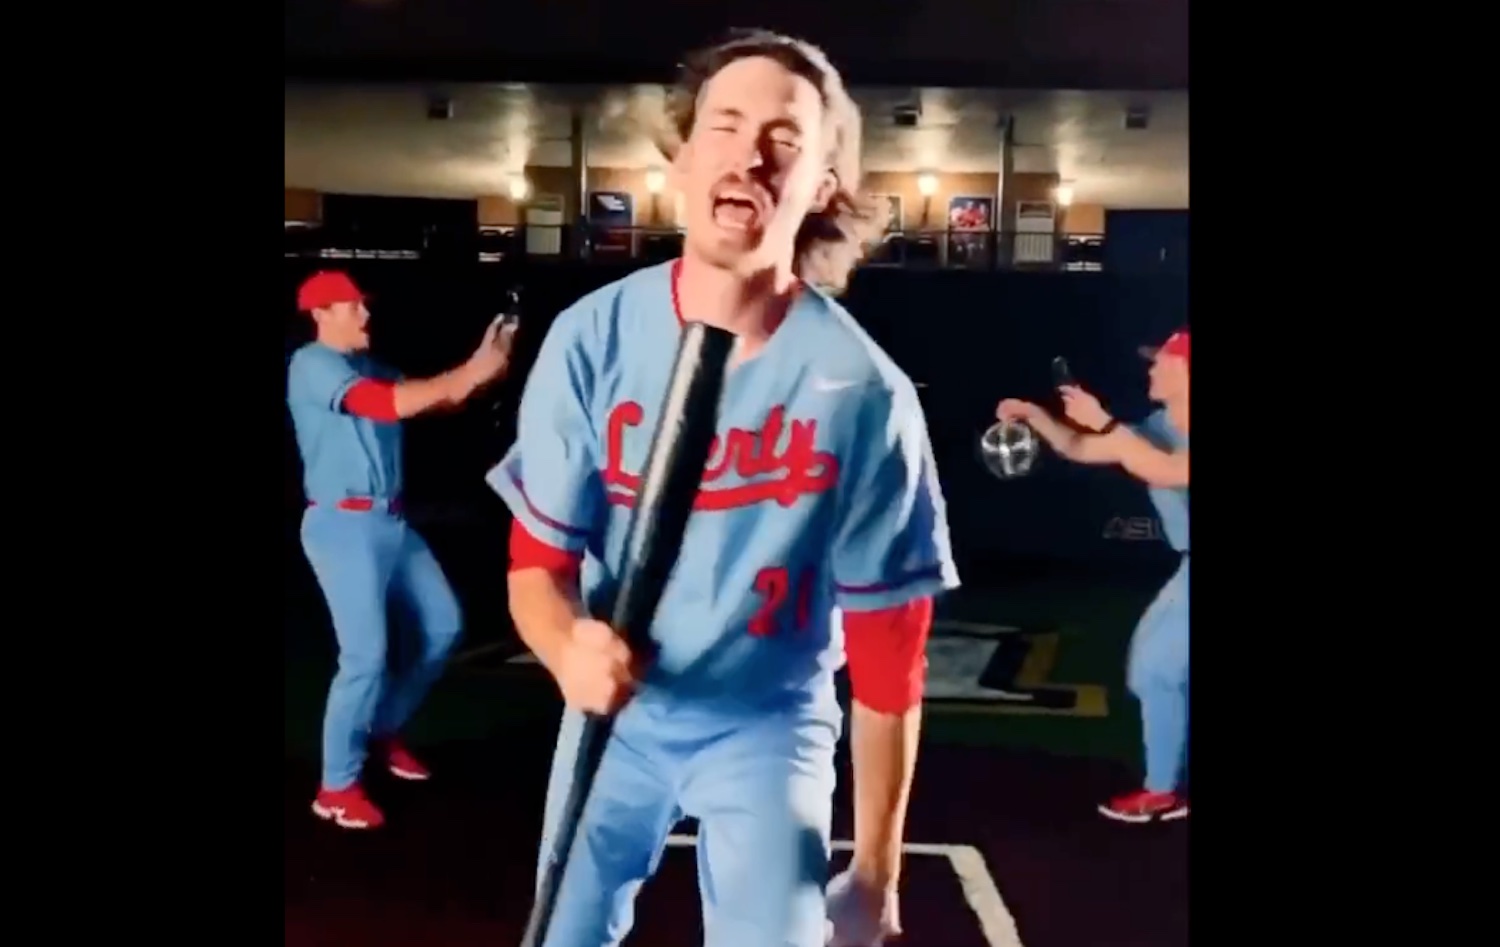 Daily Sports Smile: Liberty Flames unveil baseball uniforms with